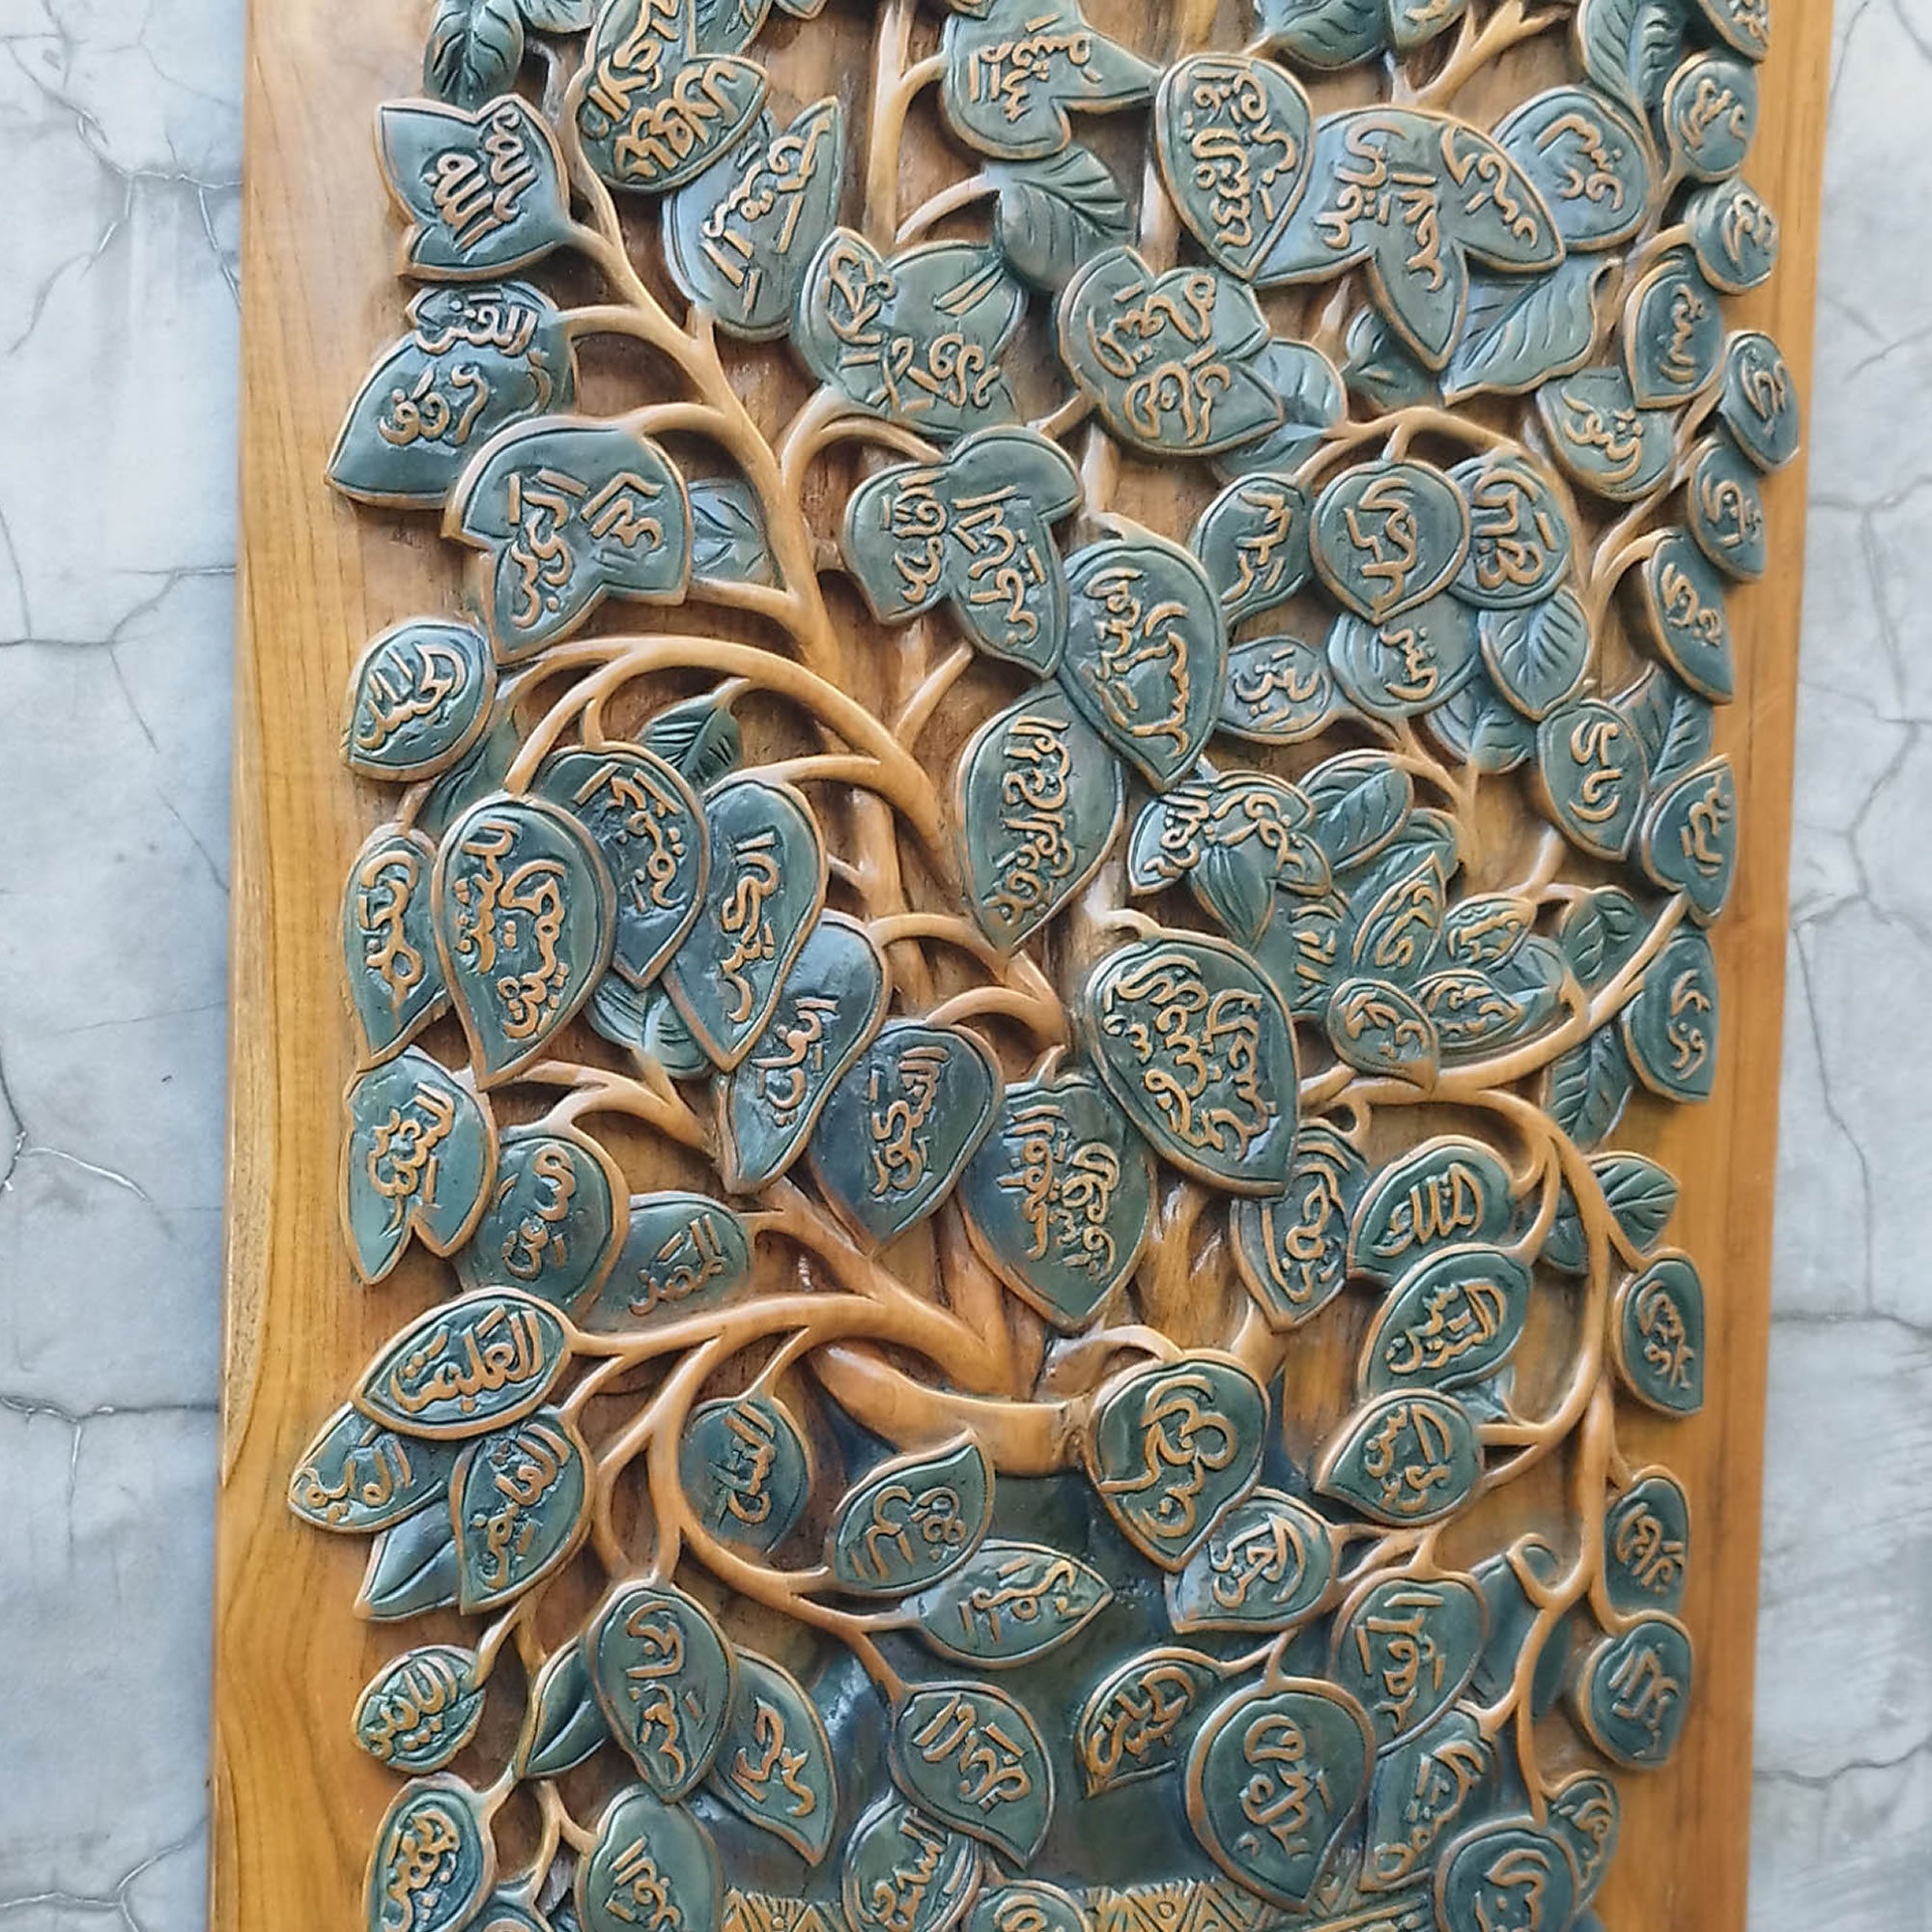 Hand Carved Teakwood Decorative Wall Art Sculpture Islamic Arabian Calligraphy Asmaul Husna | Rare Antique Style | A Perfect Gift